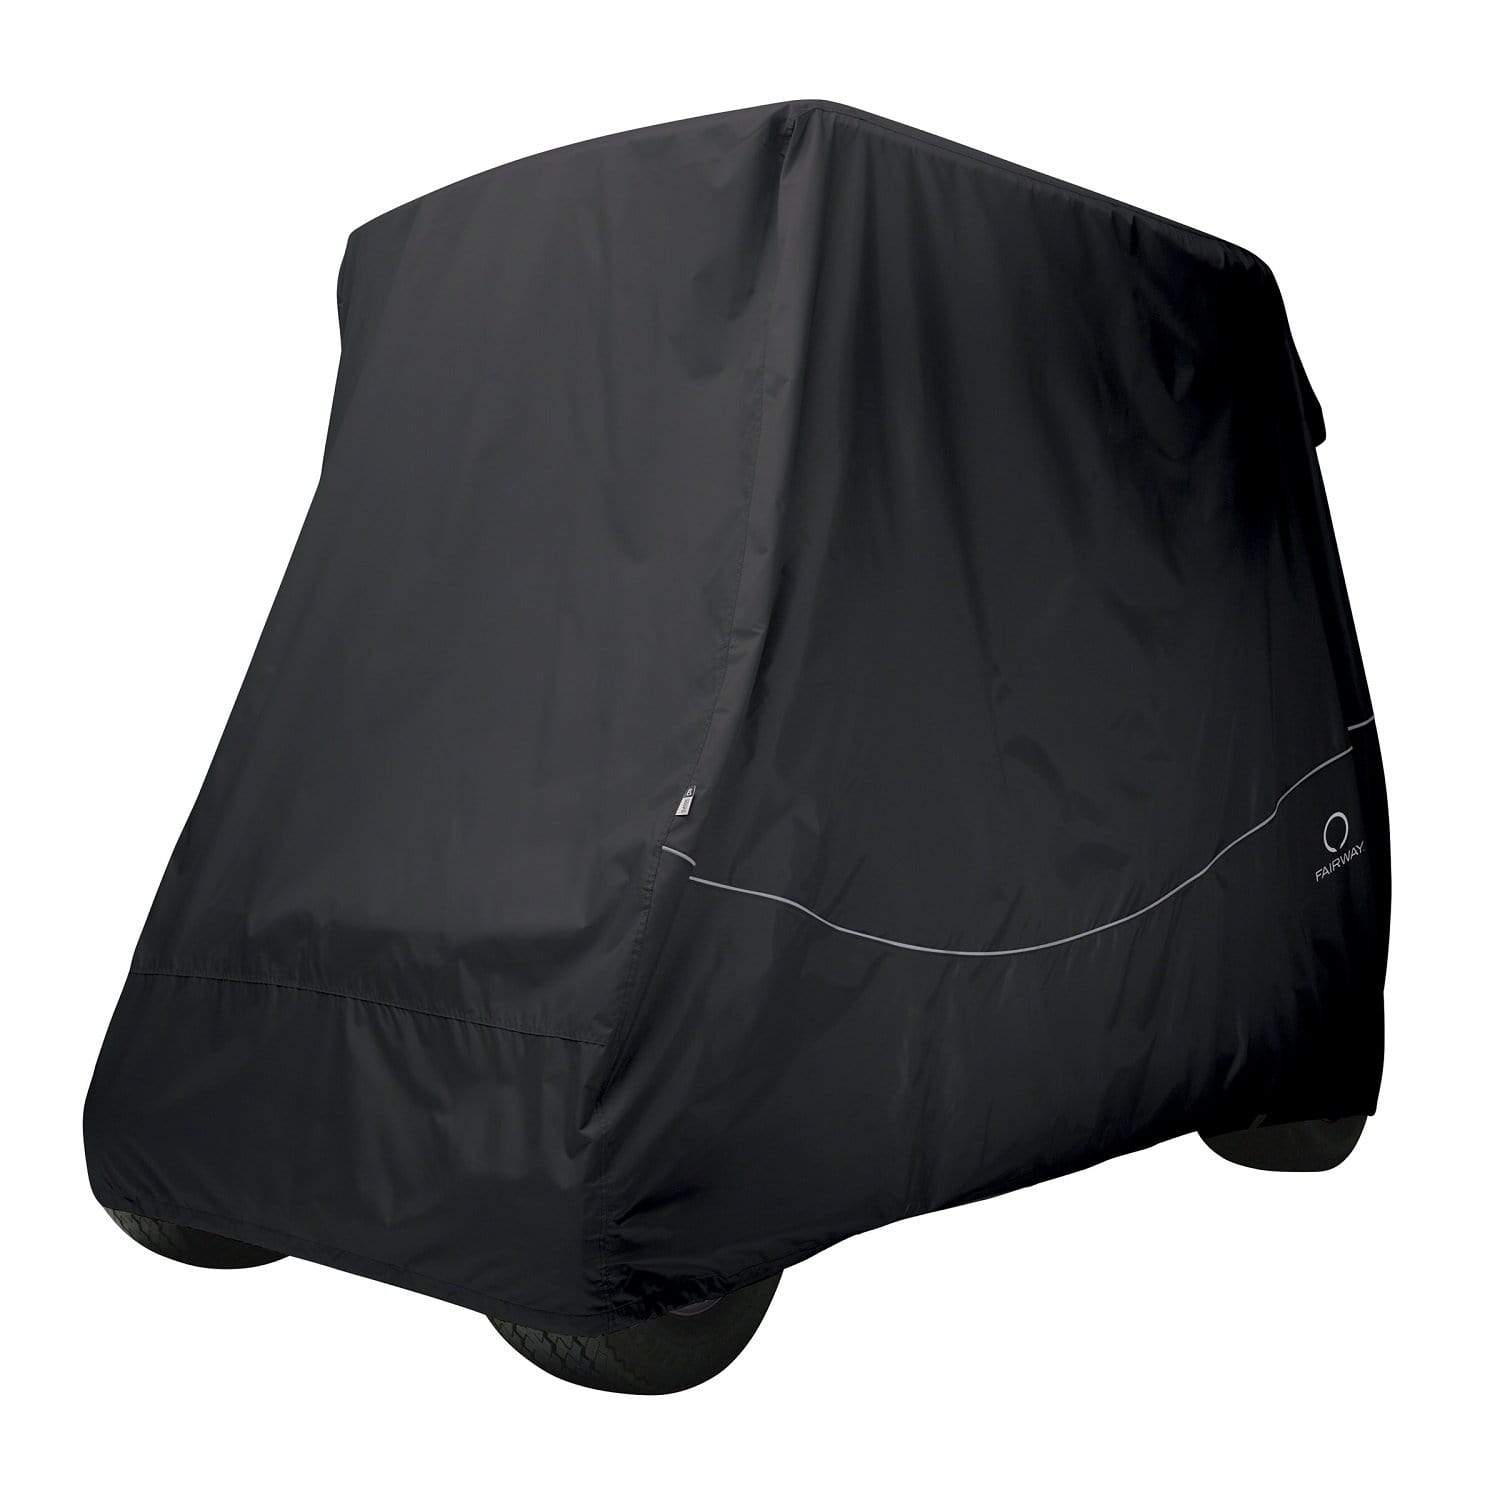 Classic Accessories Golf : Accessories Classic Fairway Golf Cart Quick-Fit Cover Long Roof - Black